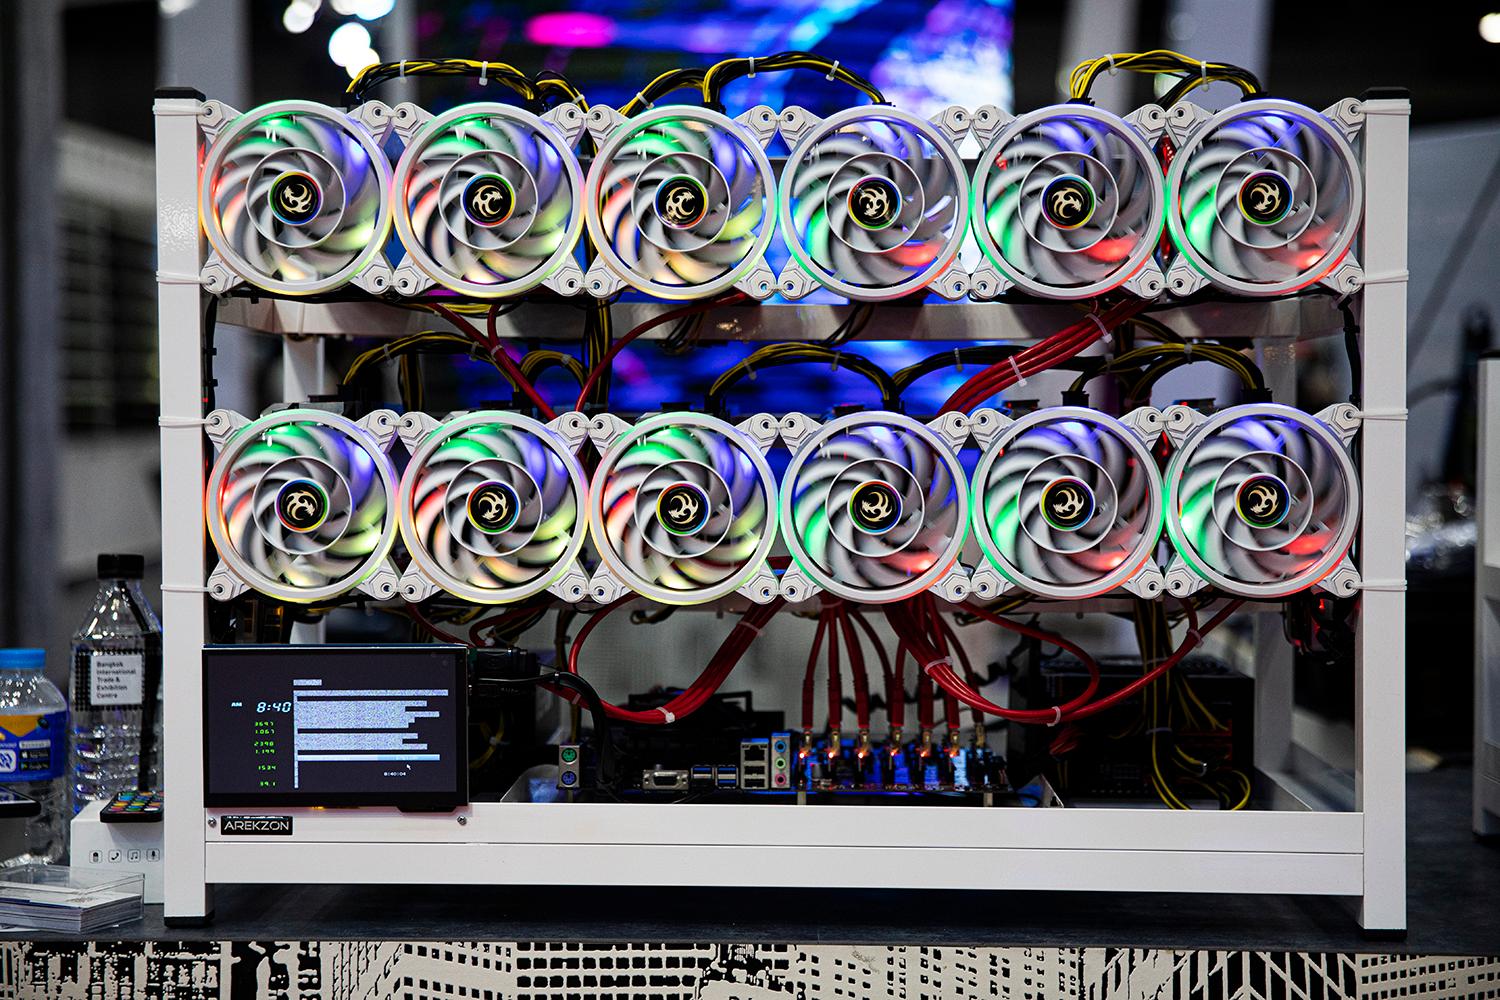 Mining rigs on display at the Thailand Crypto Expo on May 14, 2022, in Bangkok. (Photo by Lauren DeCicca/Getty Images)